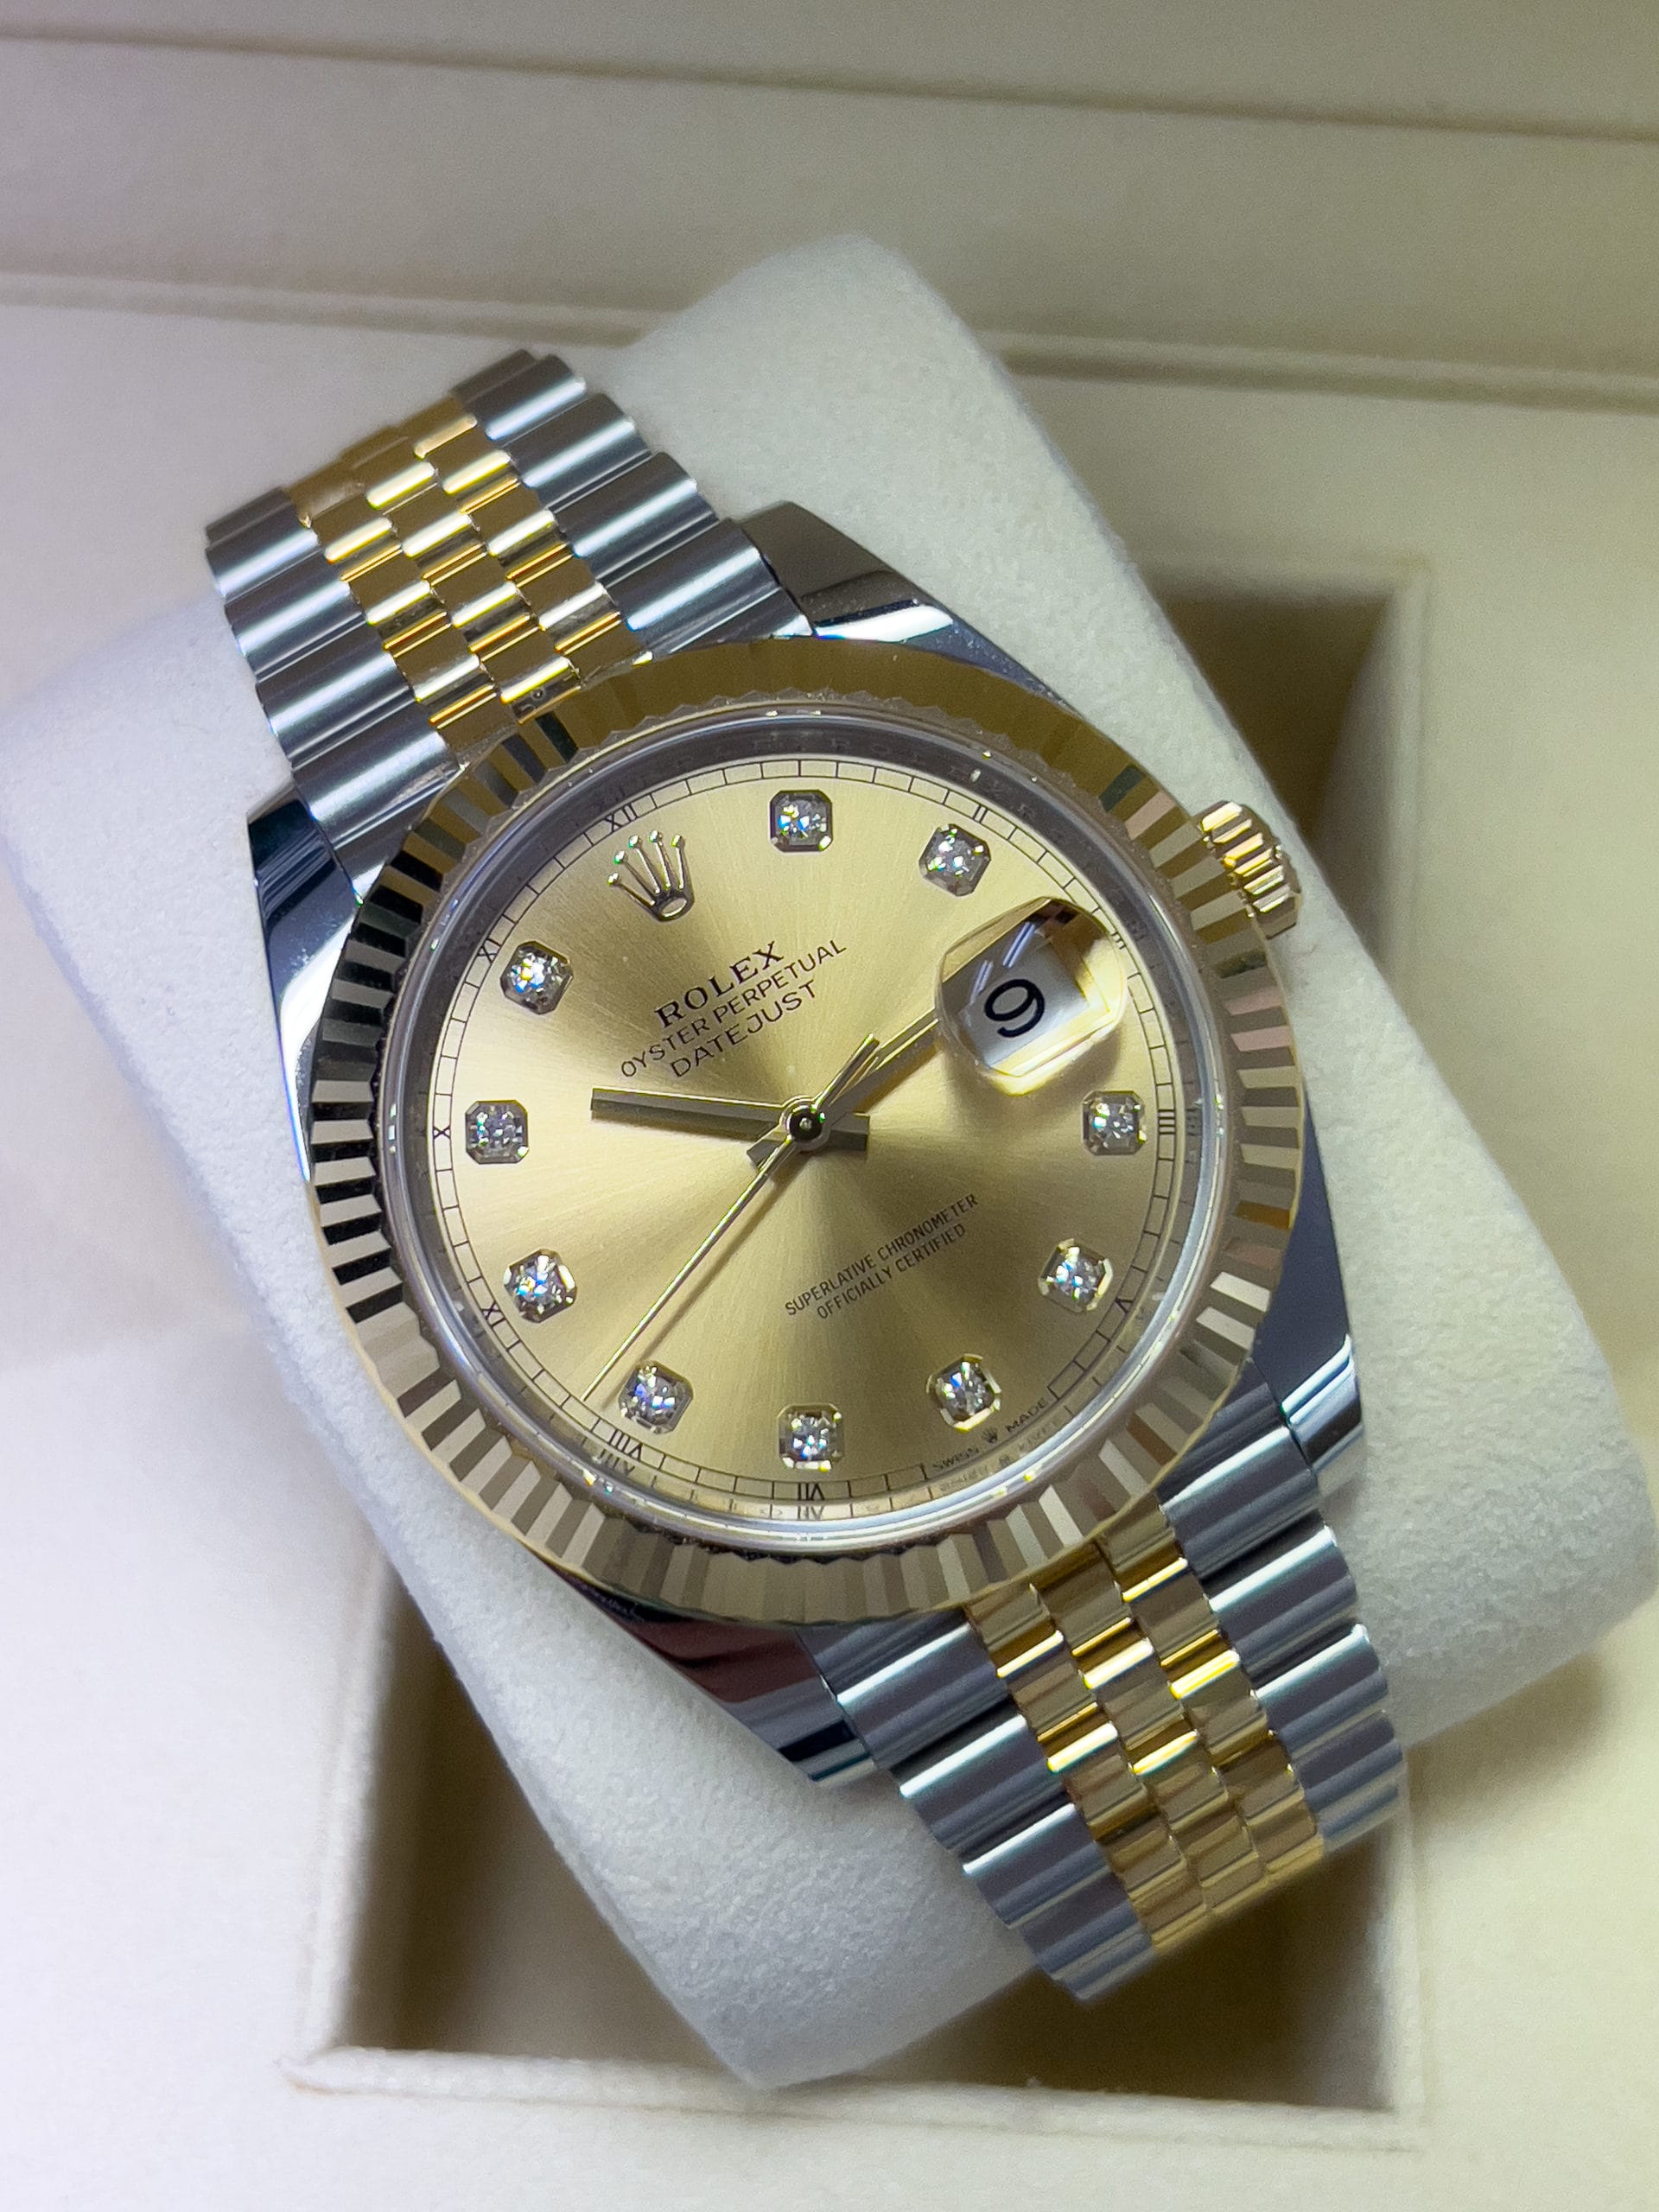 Rolex Datejust 41 Watches of Switzerland Limited Edition 5/100 Two Tone ...